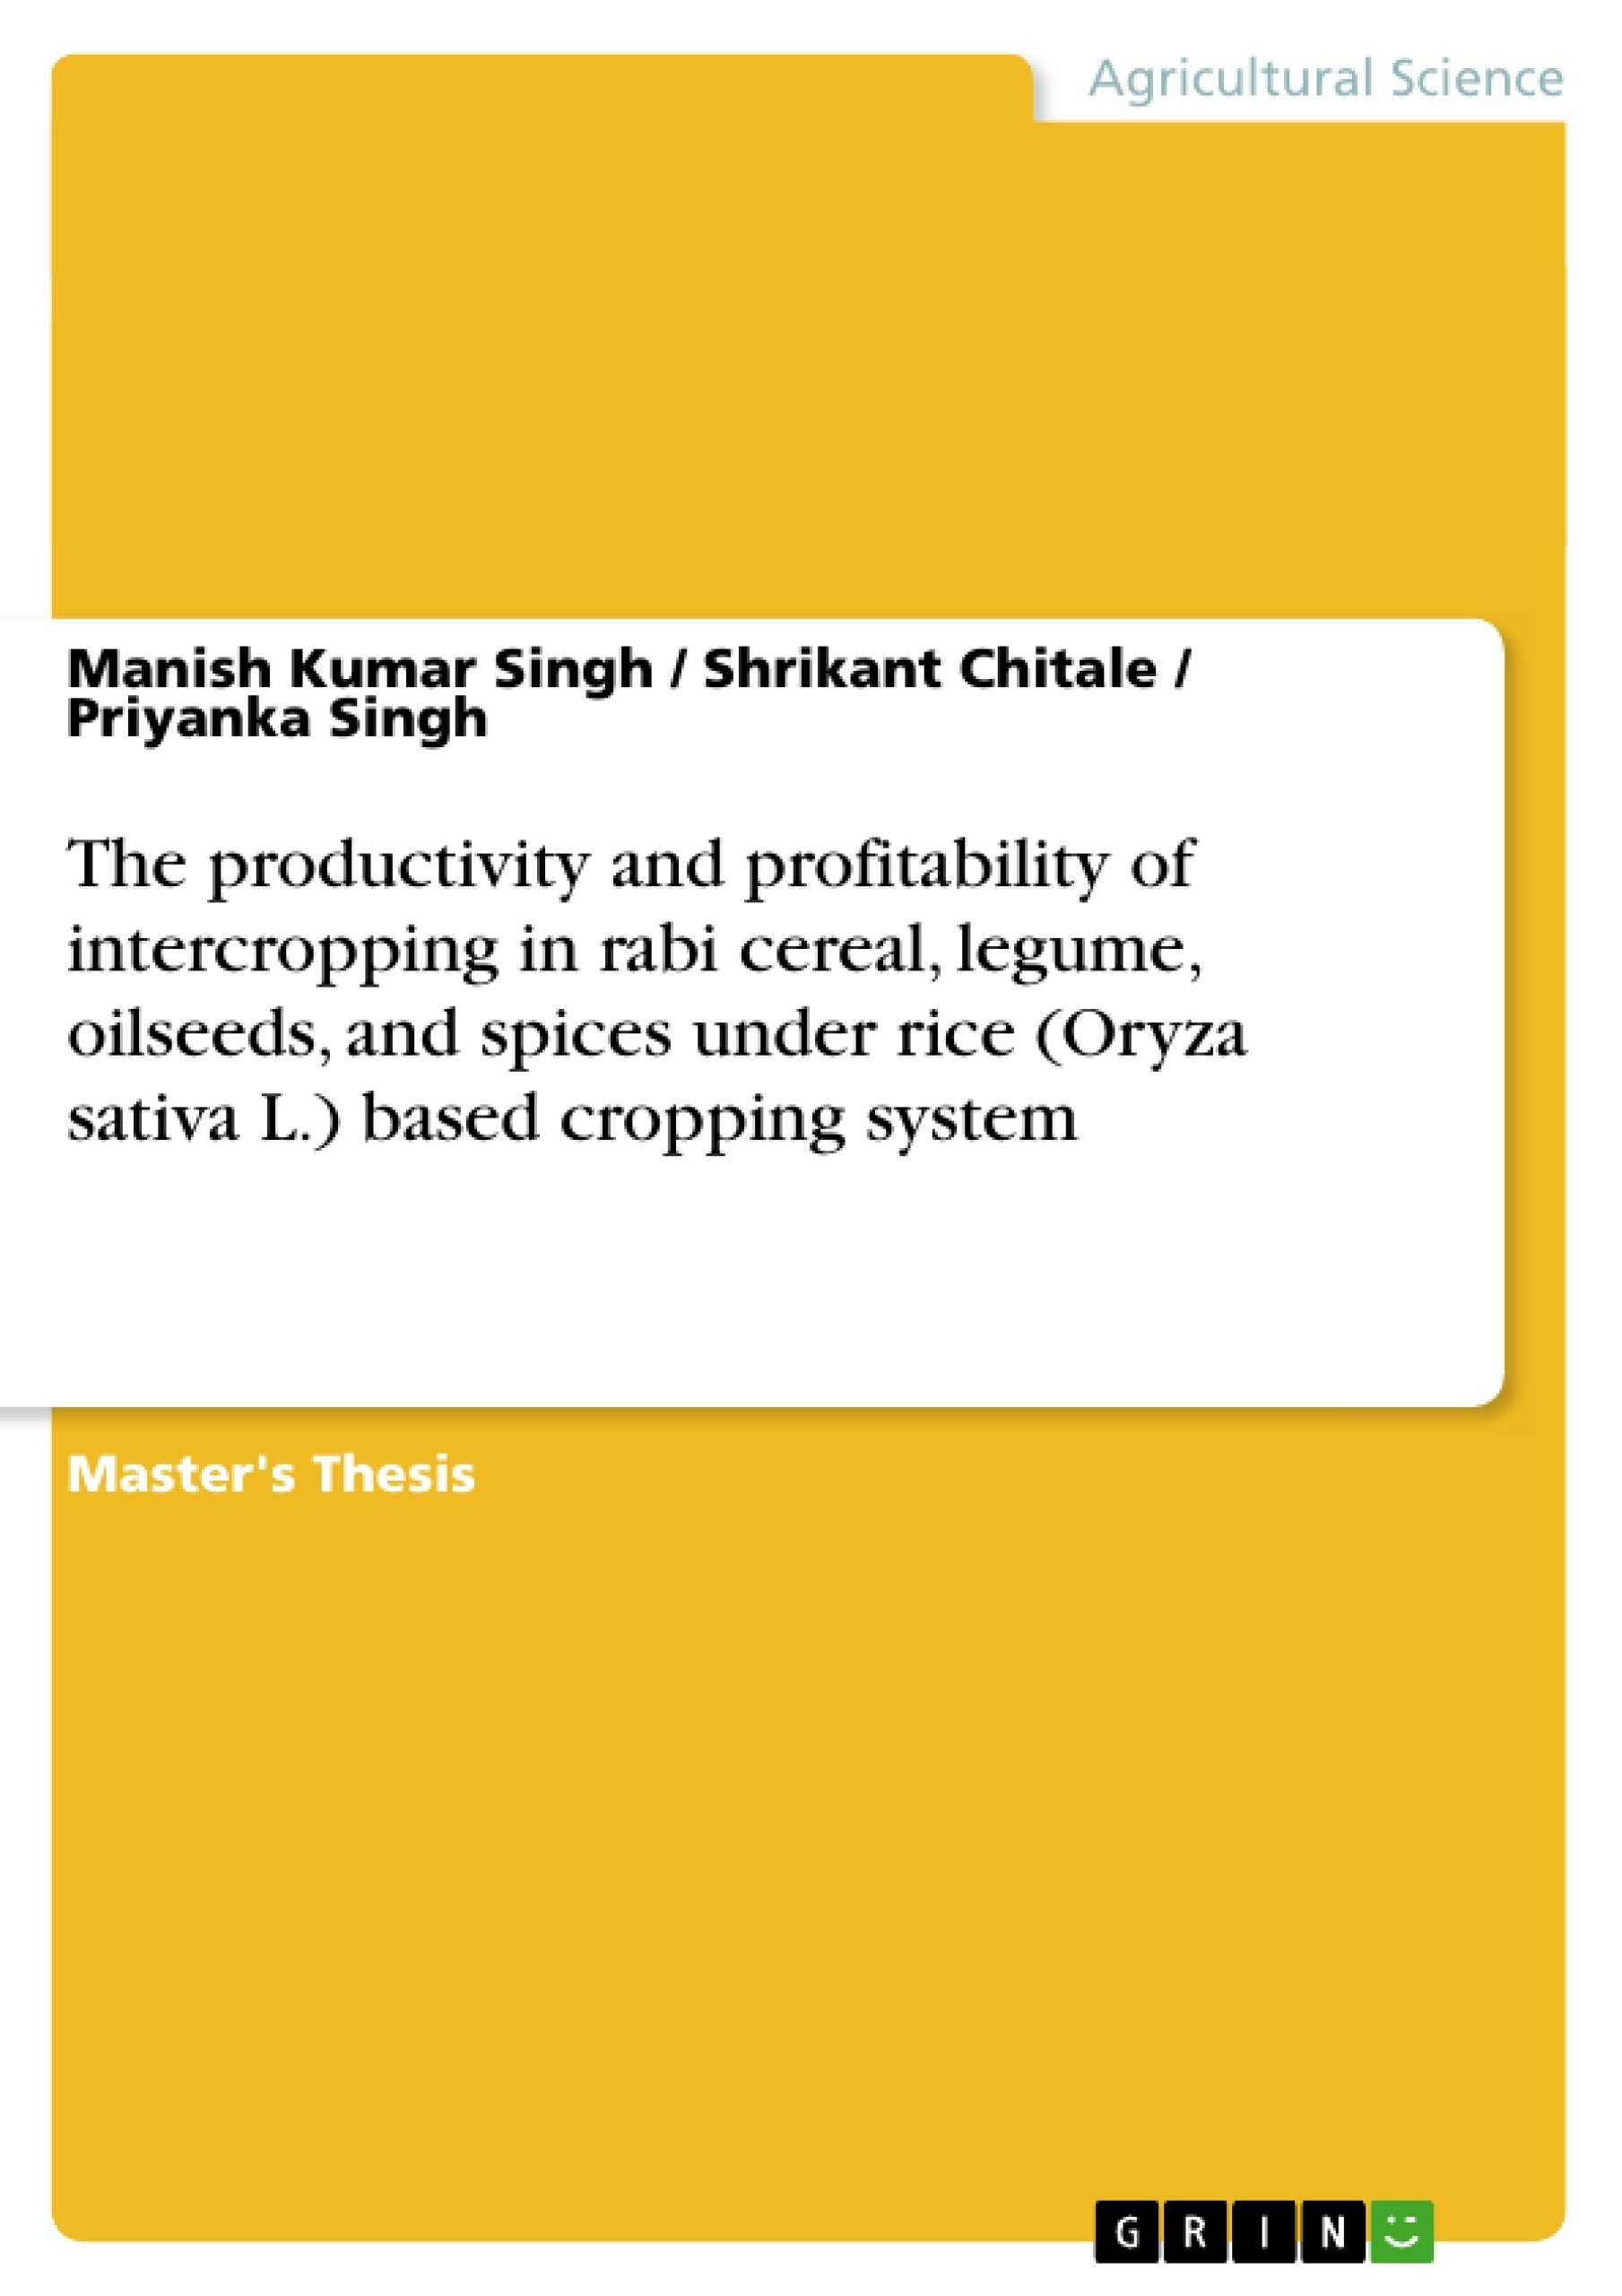 Title: The productivity and profitability of intercropping in rabi cereal, legume, oilseeds, and spices under rice (Oryza sativa L.) based cropping system